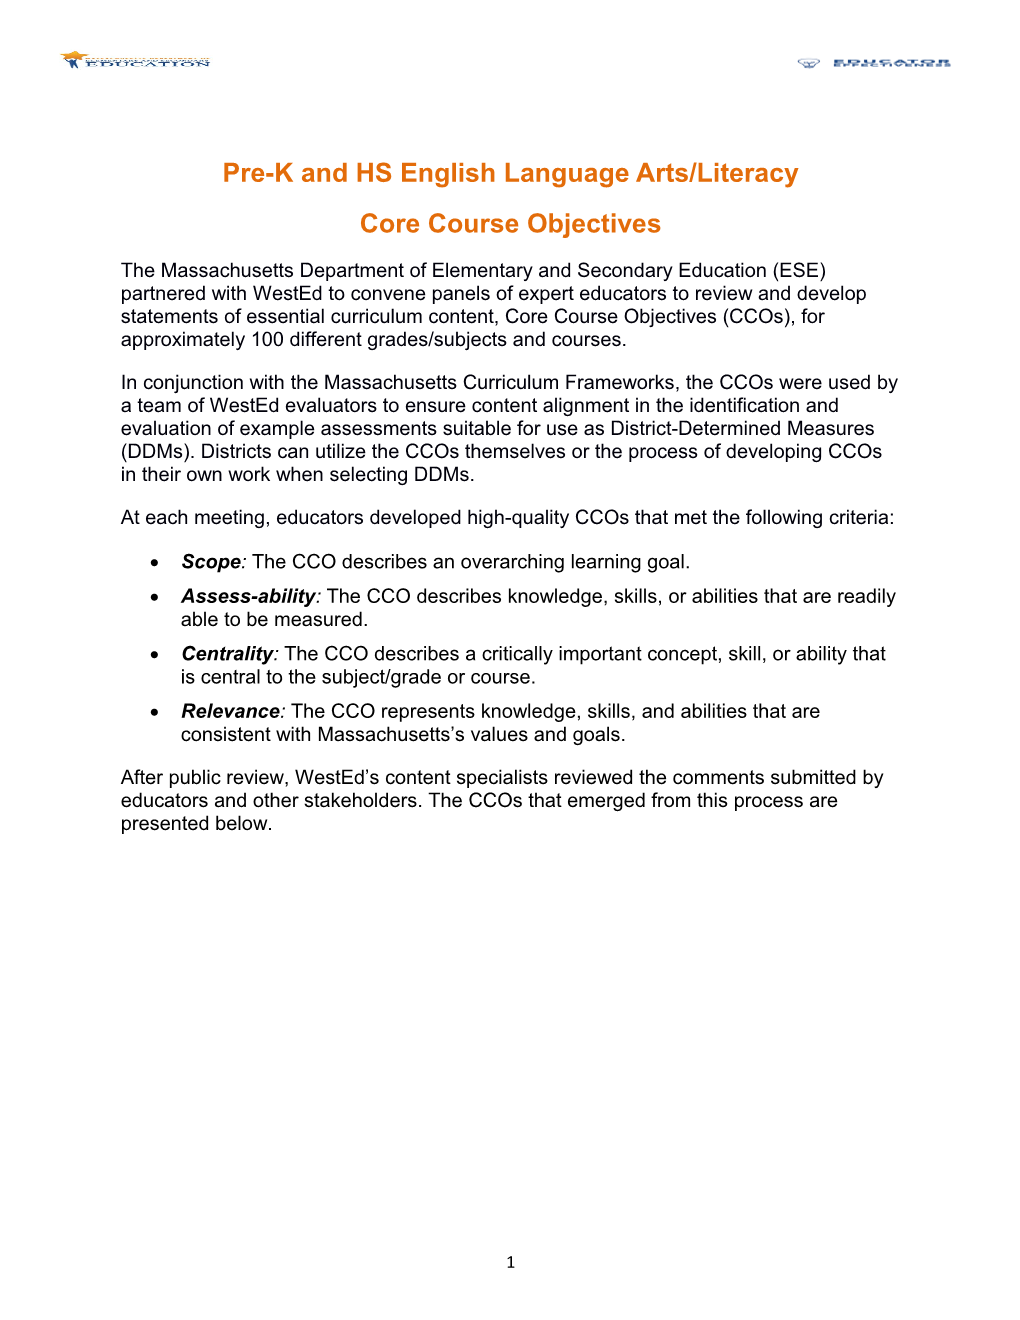 English Language Arts Example Ddms: Core Course Objectives